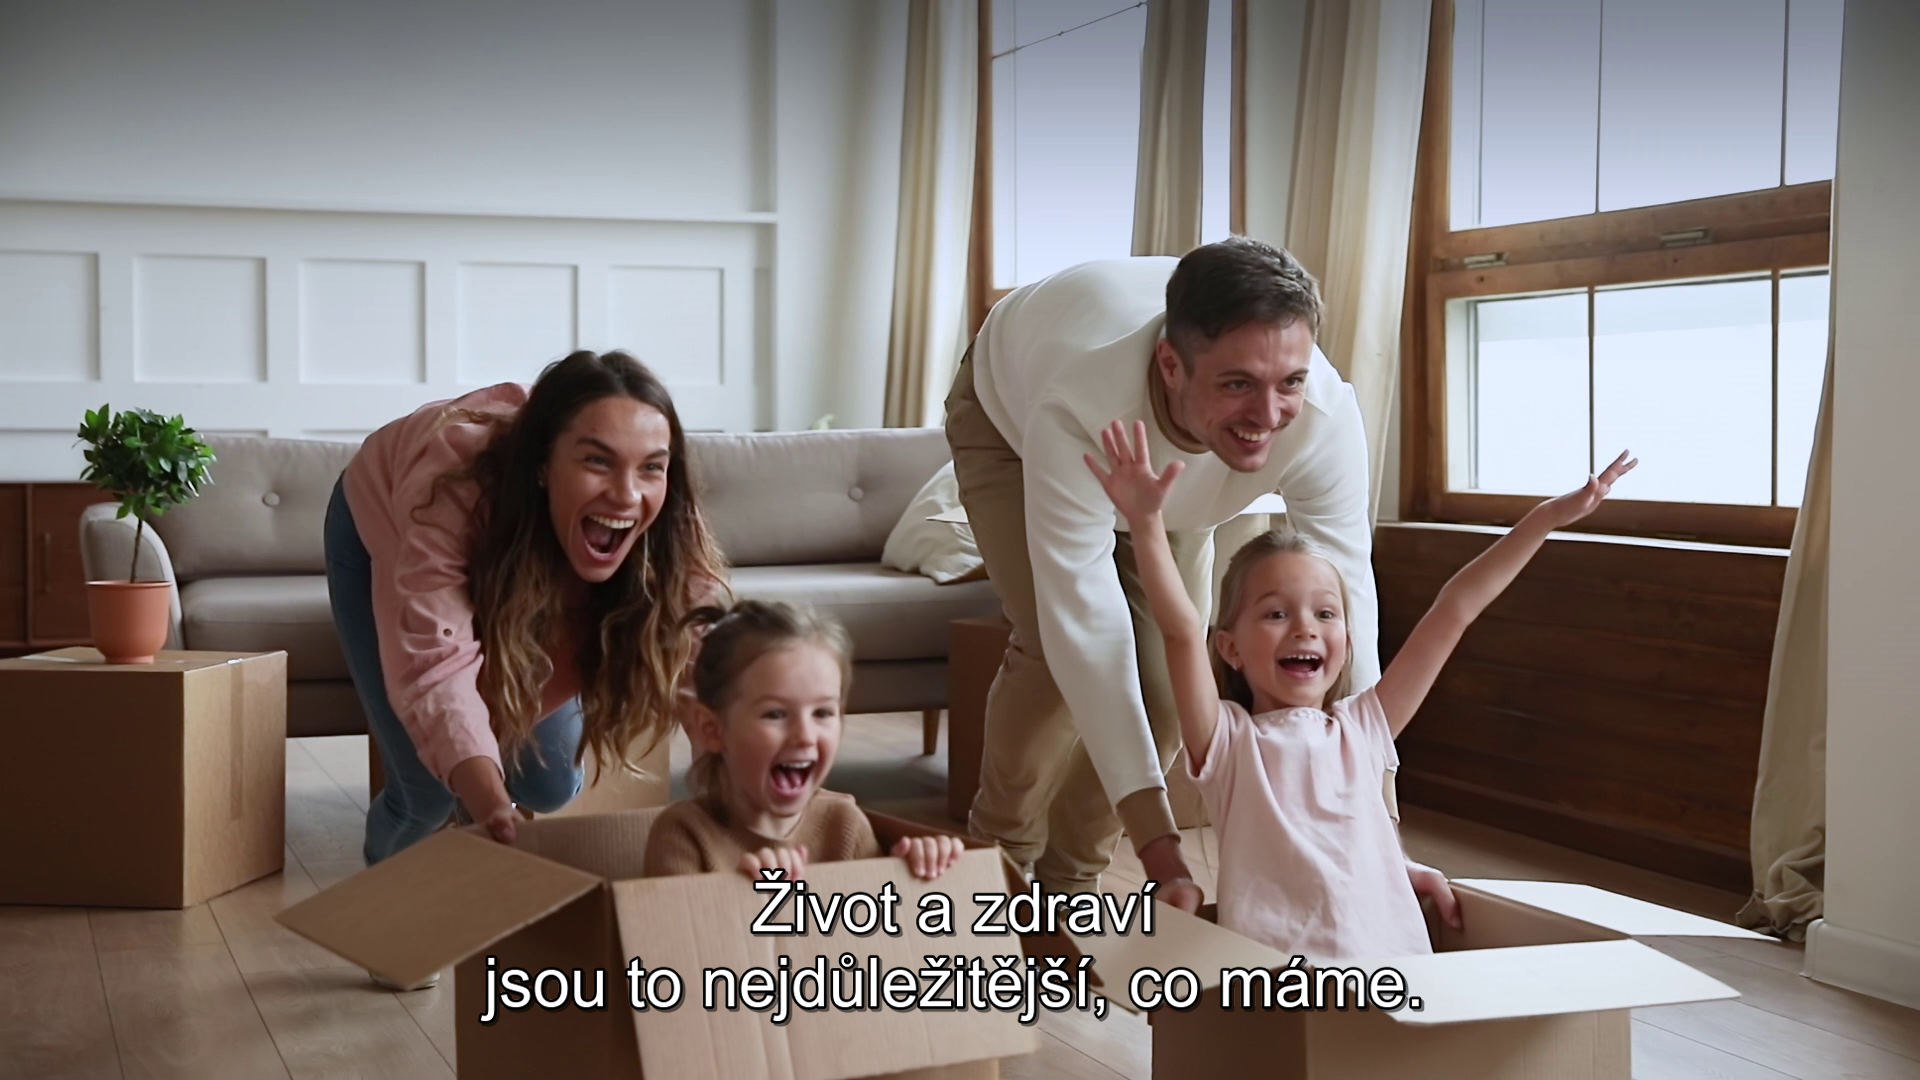 screenshot from Czech Subtitles for Company Video Content